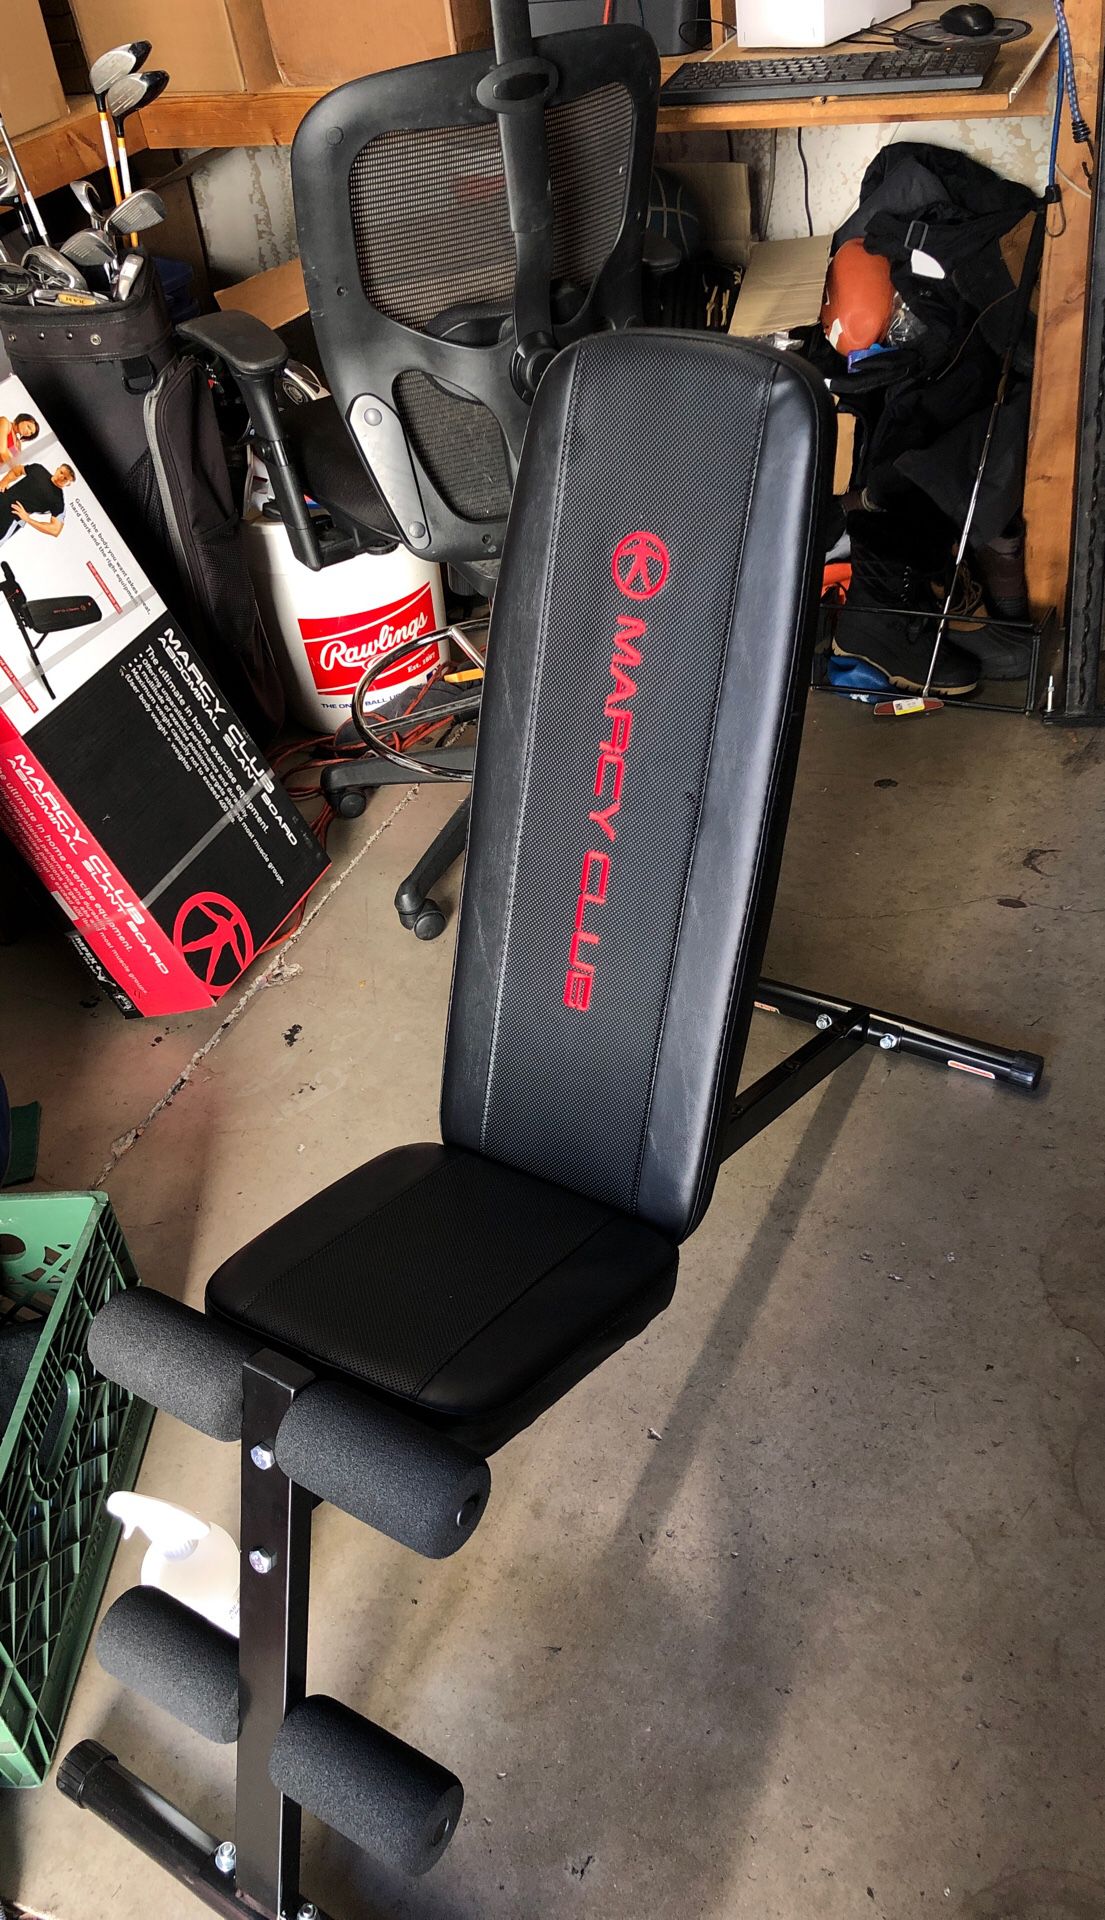 New in box Marcy club dumbbell bench